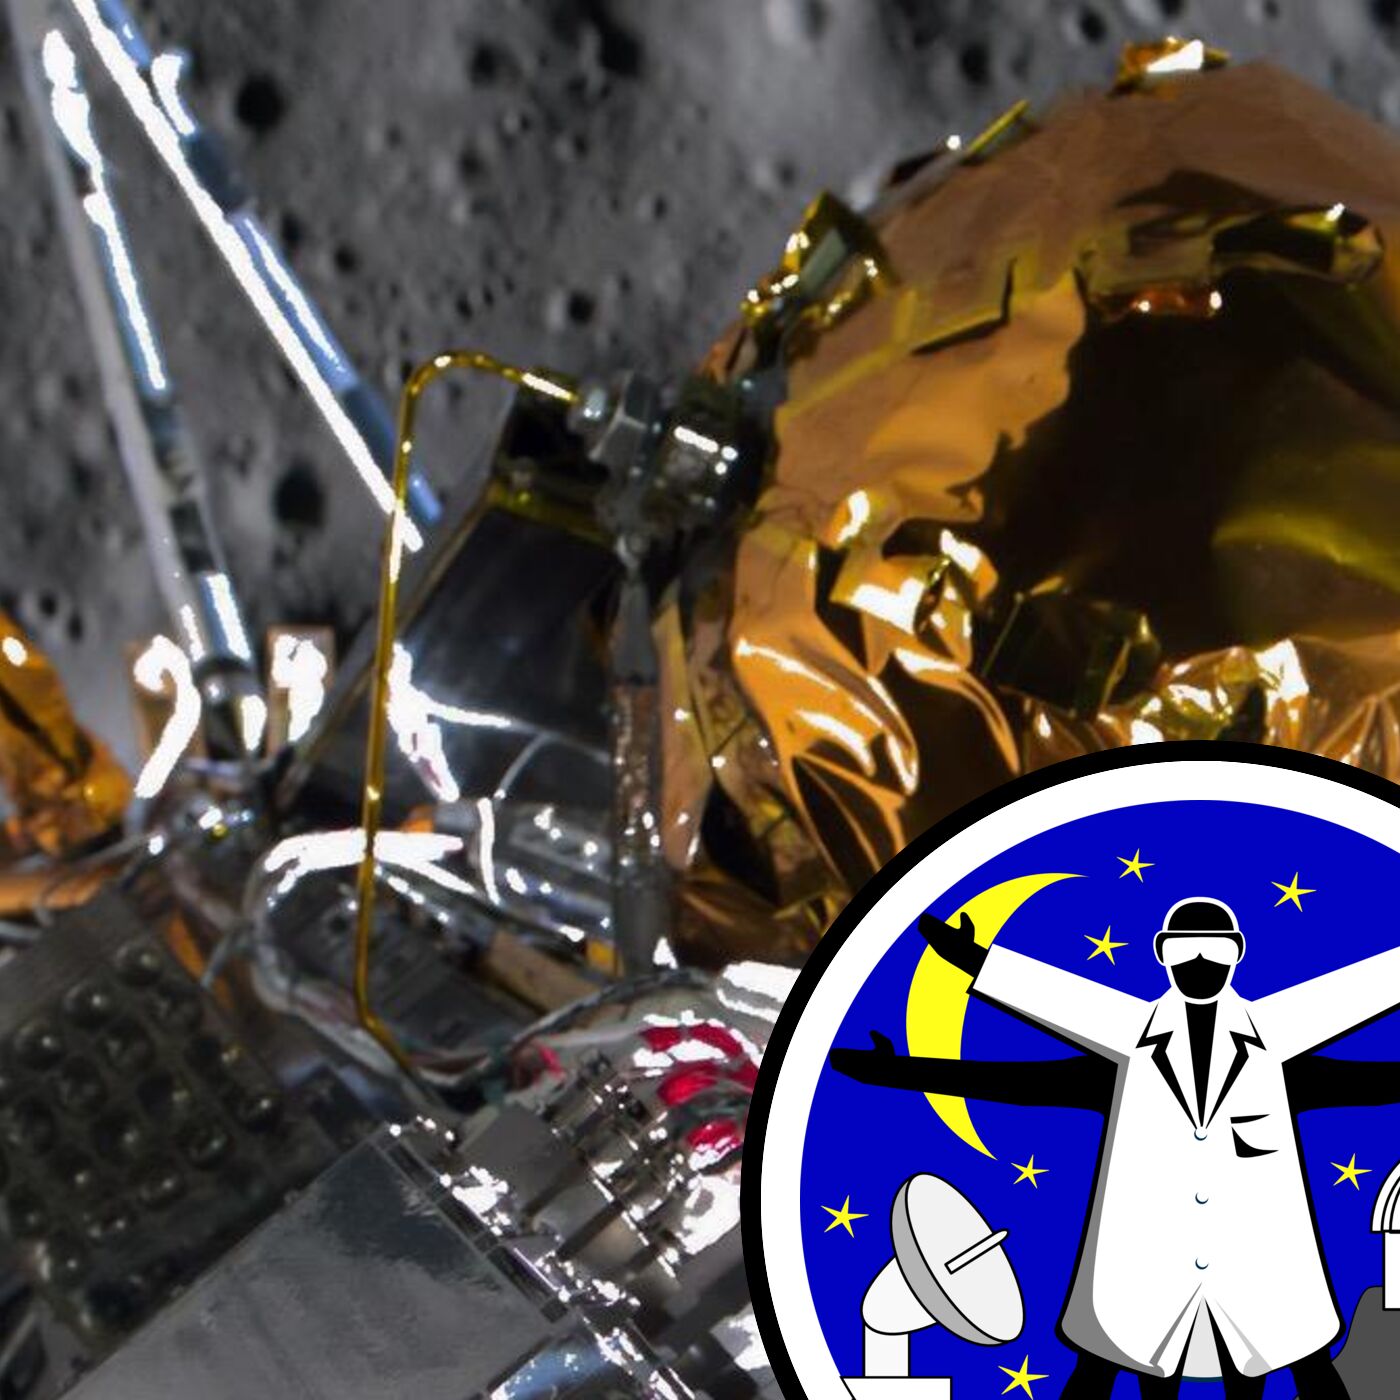 America's return to the Moon and UK lunar ambitions